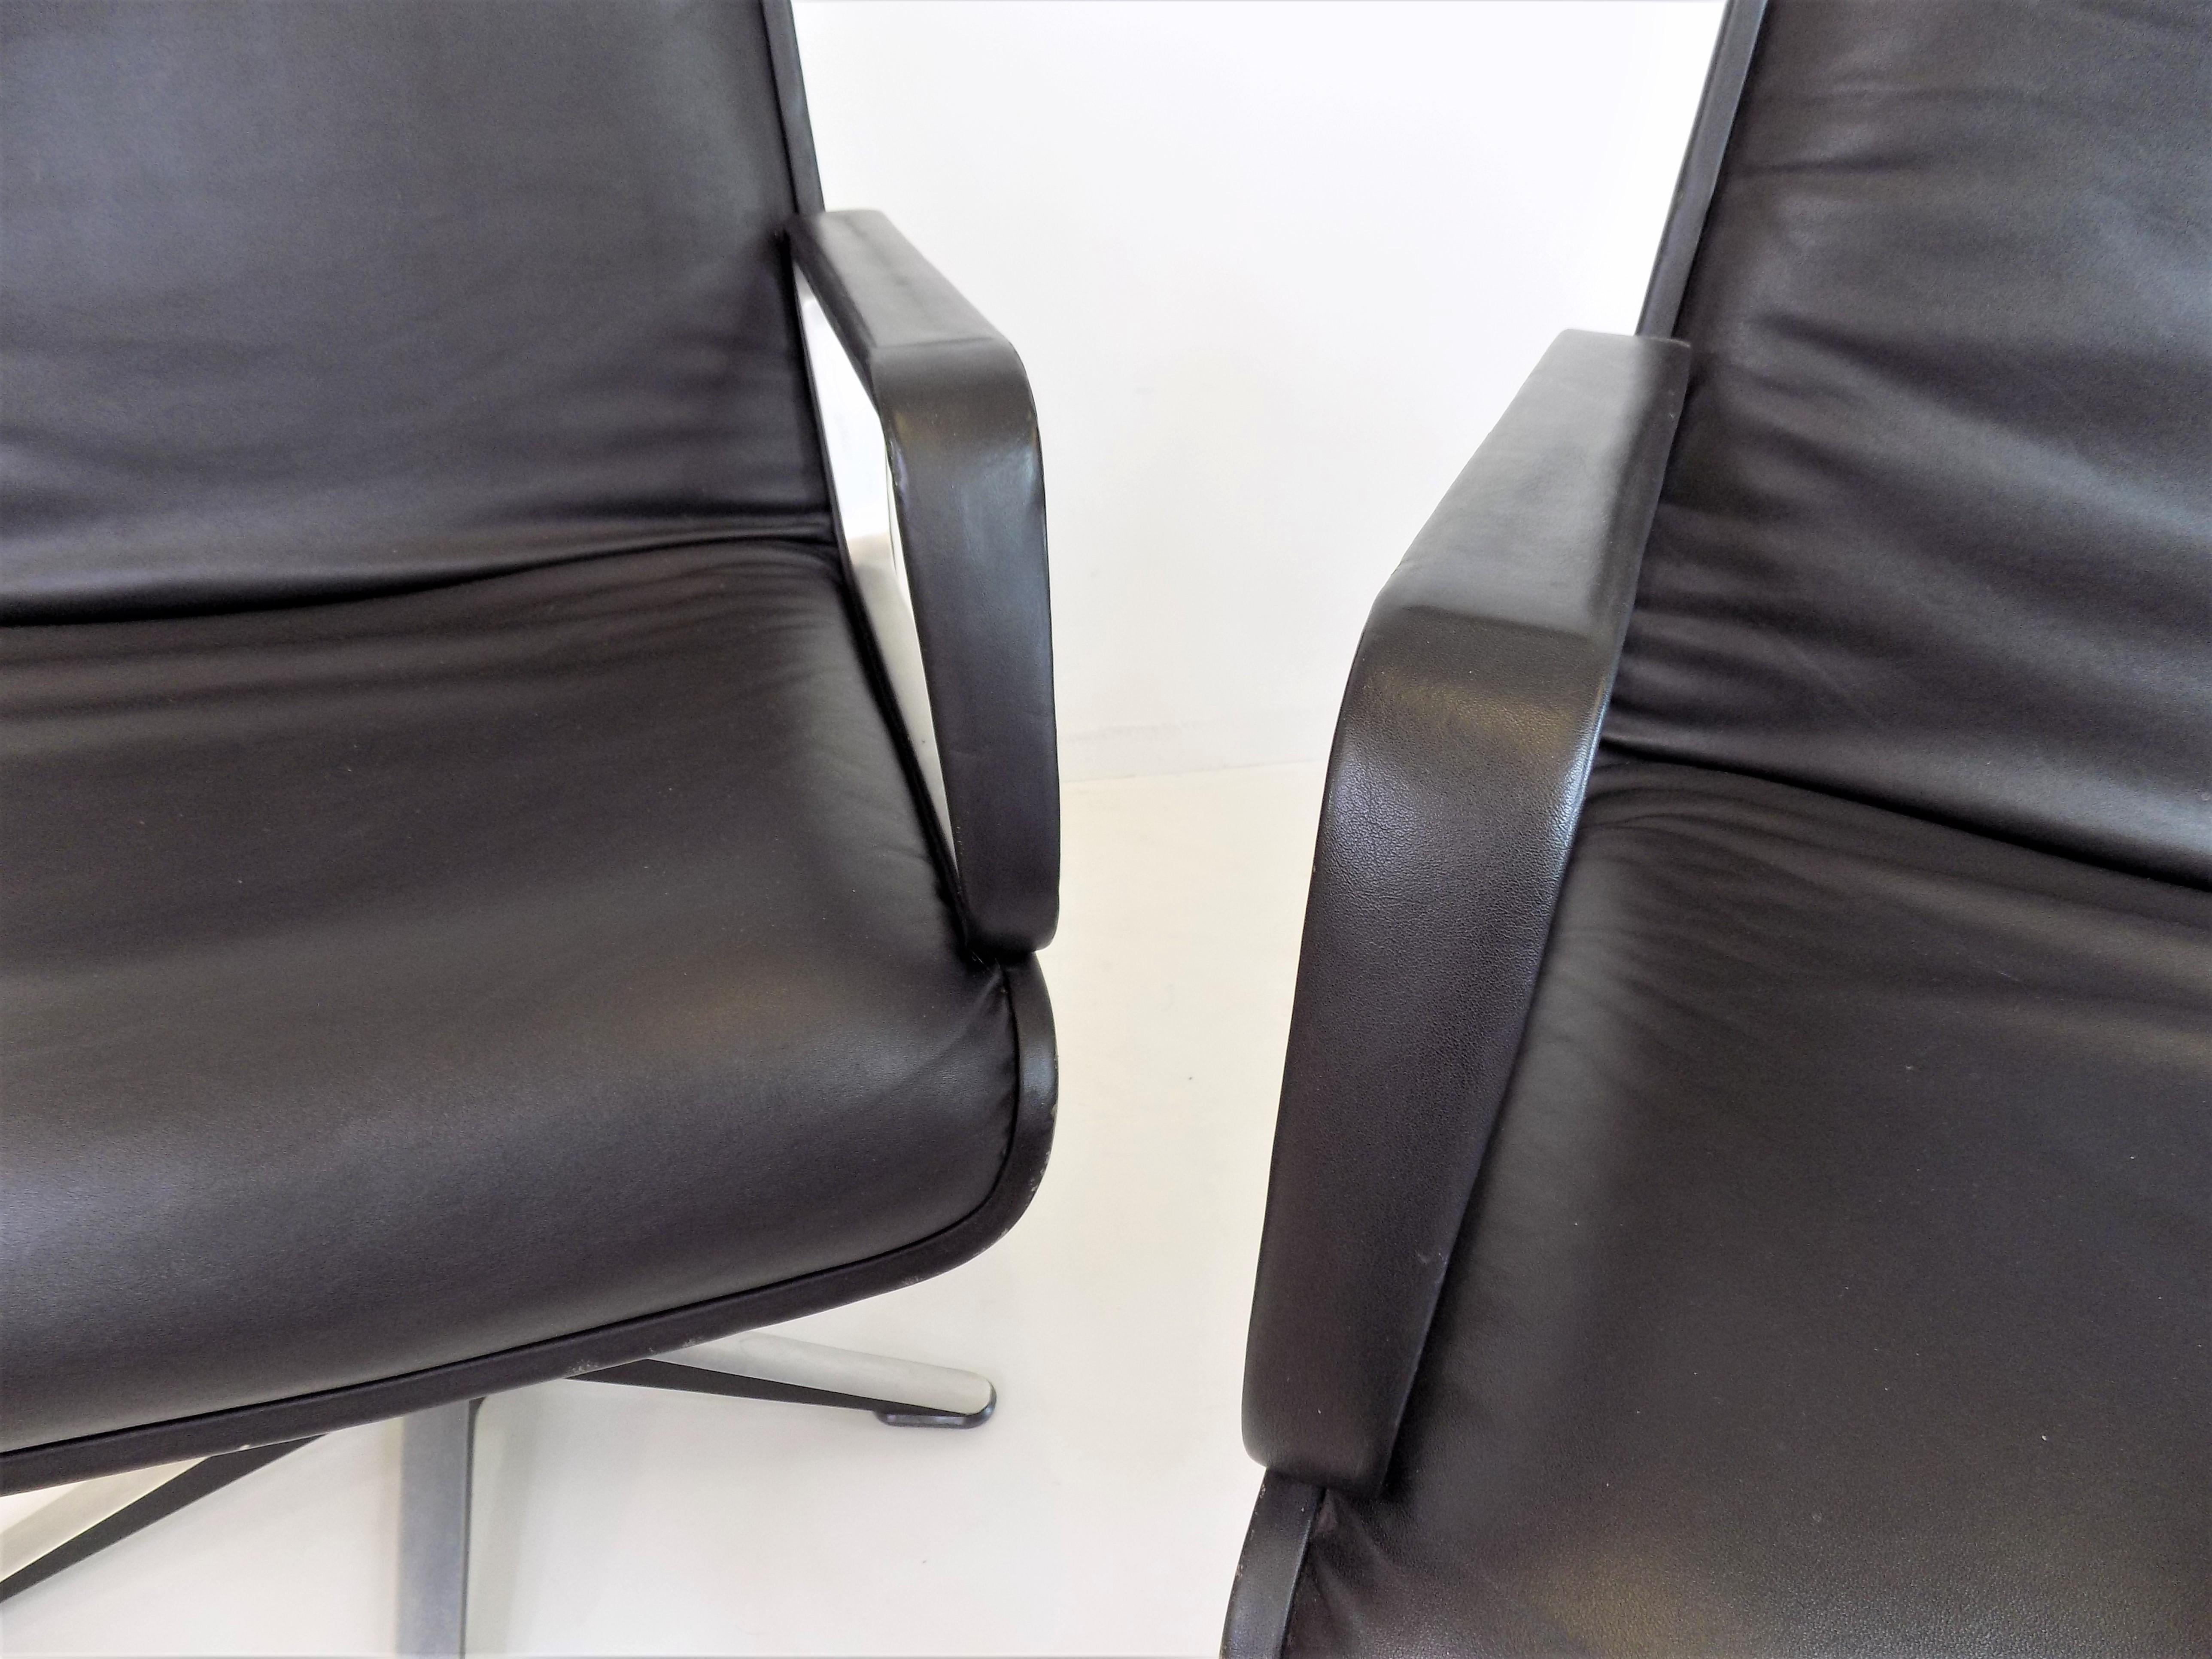 Leather Wilkhahn Delta set of 2 dining/conference chairs from Delta Group